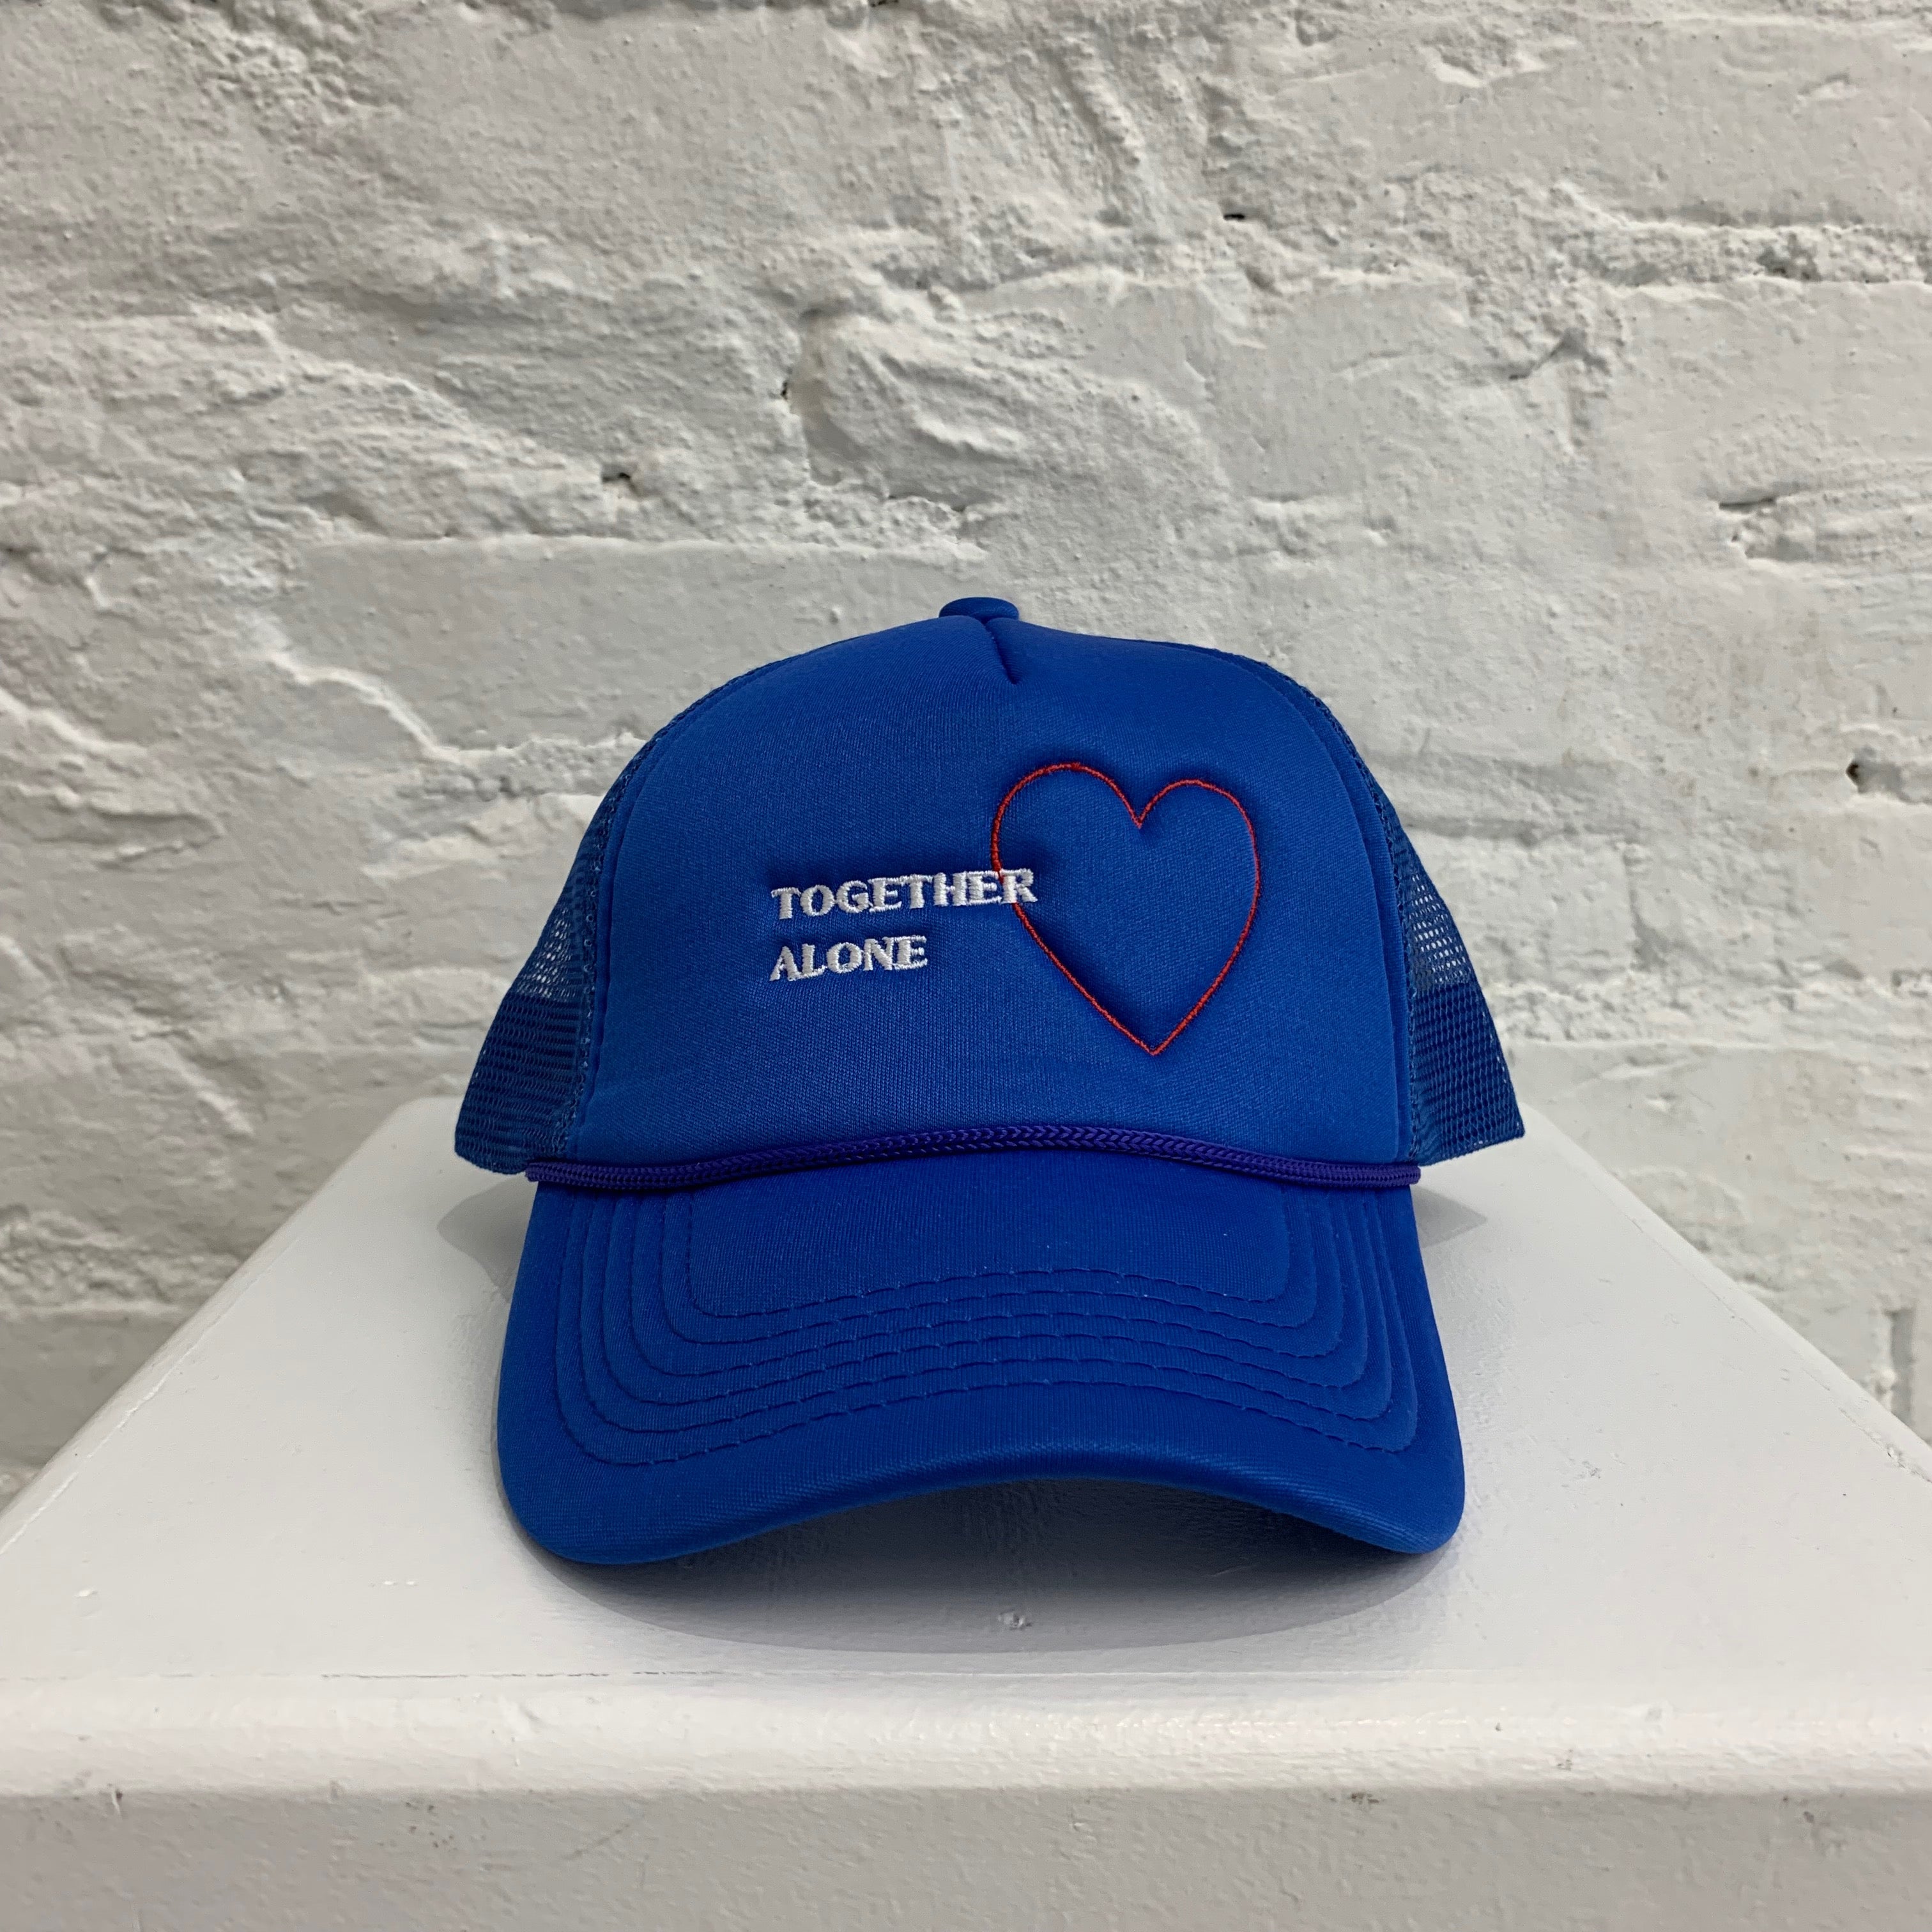 "TIME FLIES" TOGETHER ALONE TRUCKER - BLUE